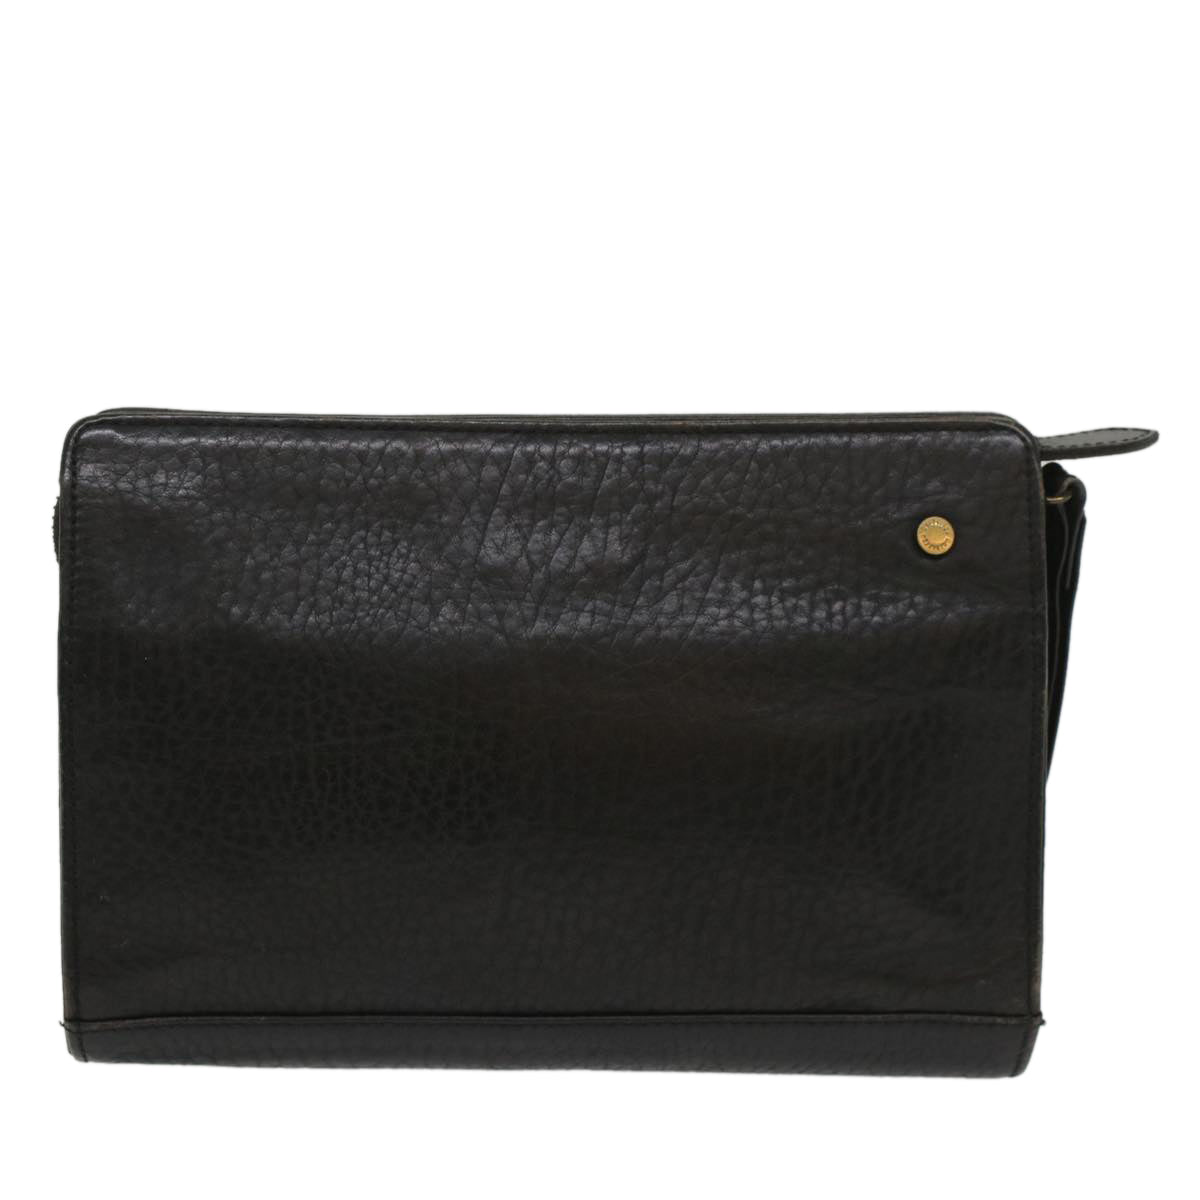 Burberrys Clutch Bag Leather Black Auth bs8538